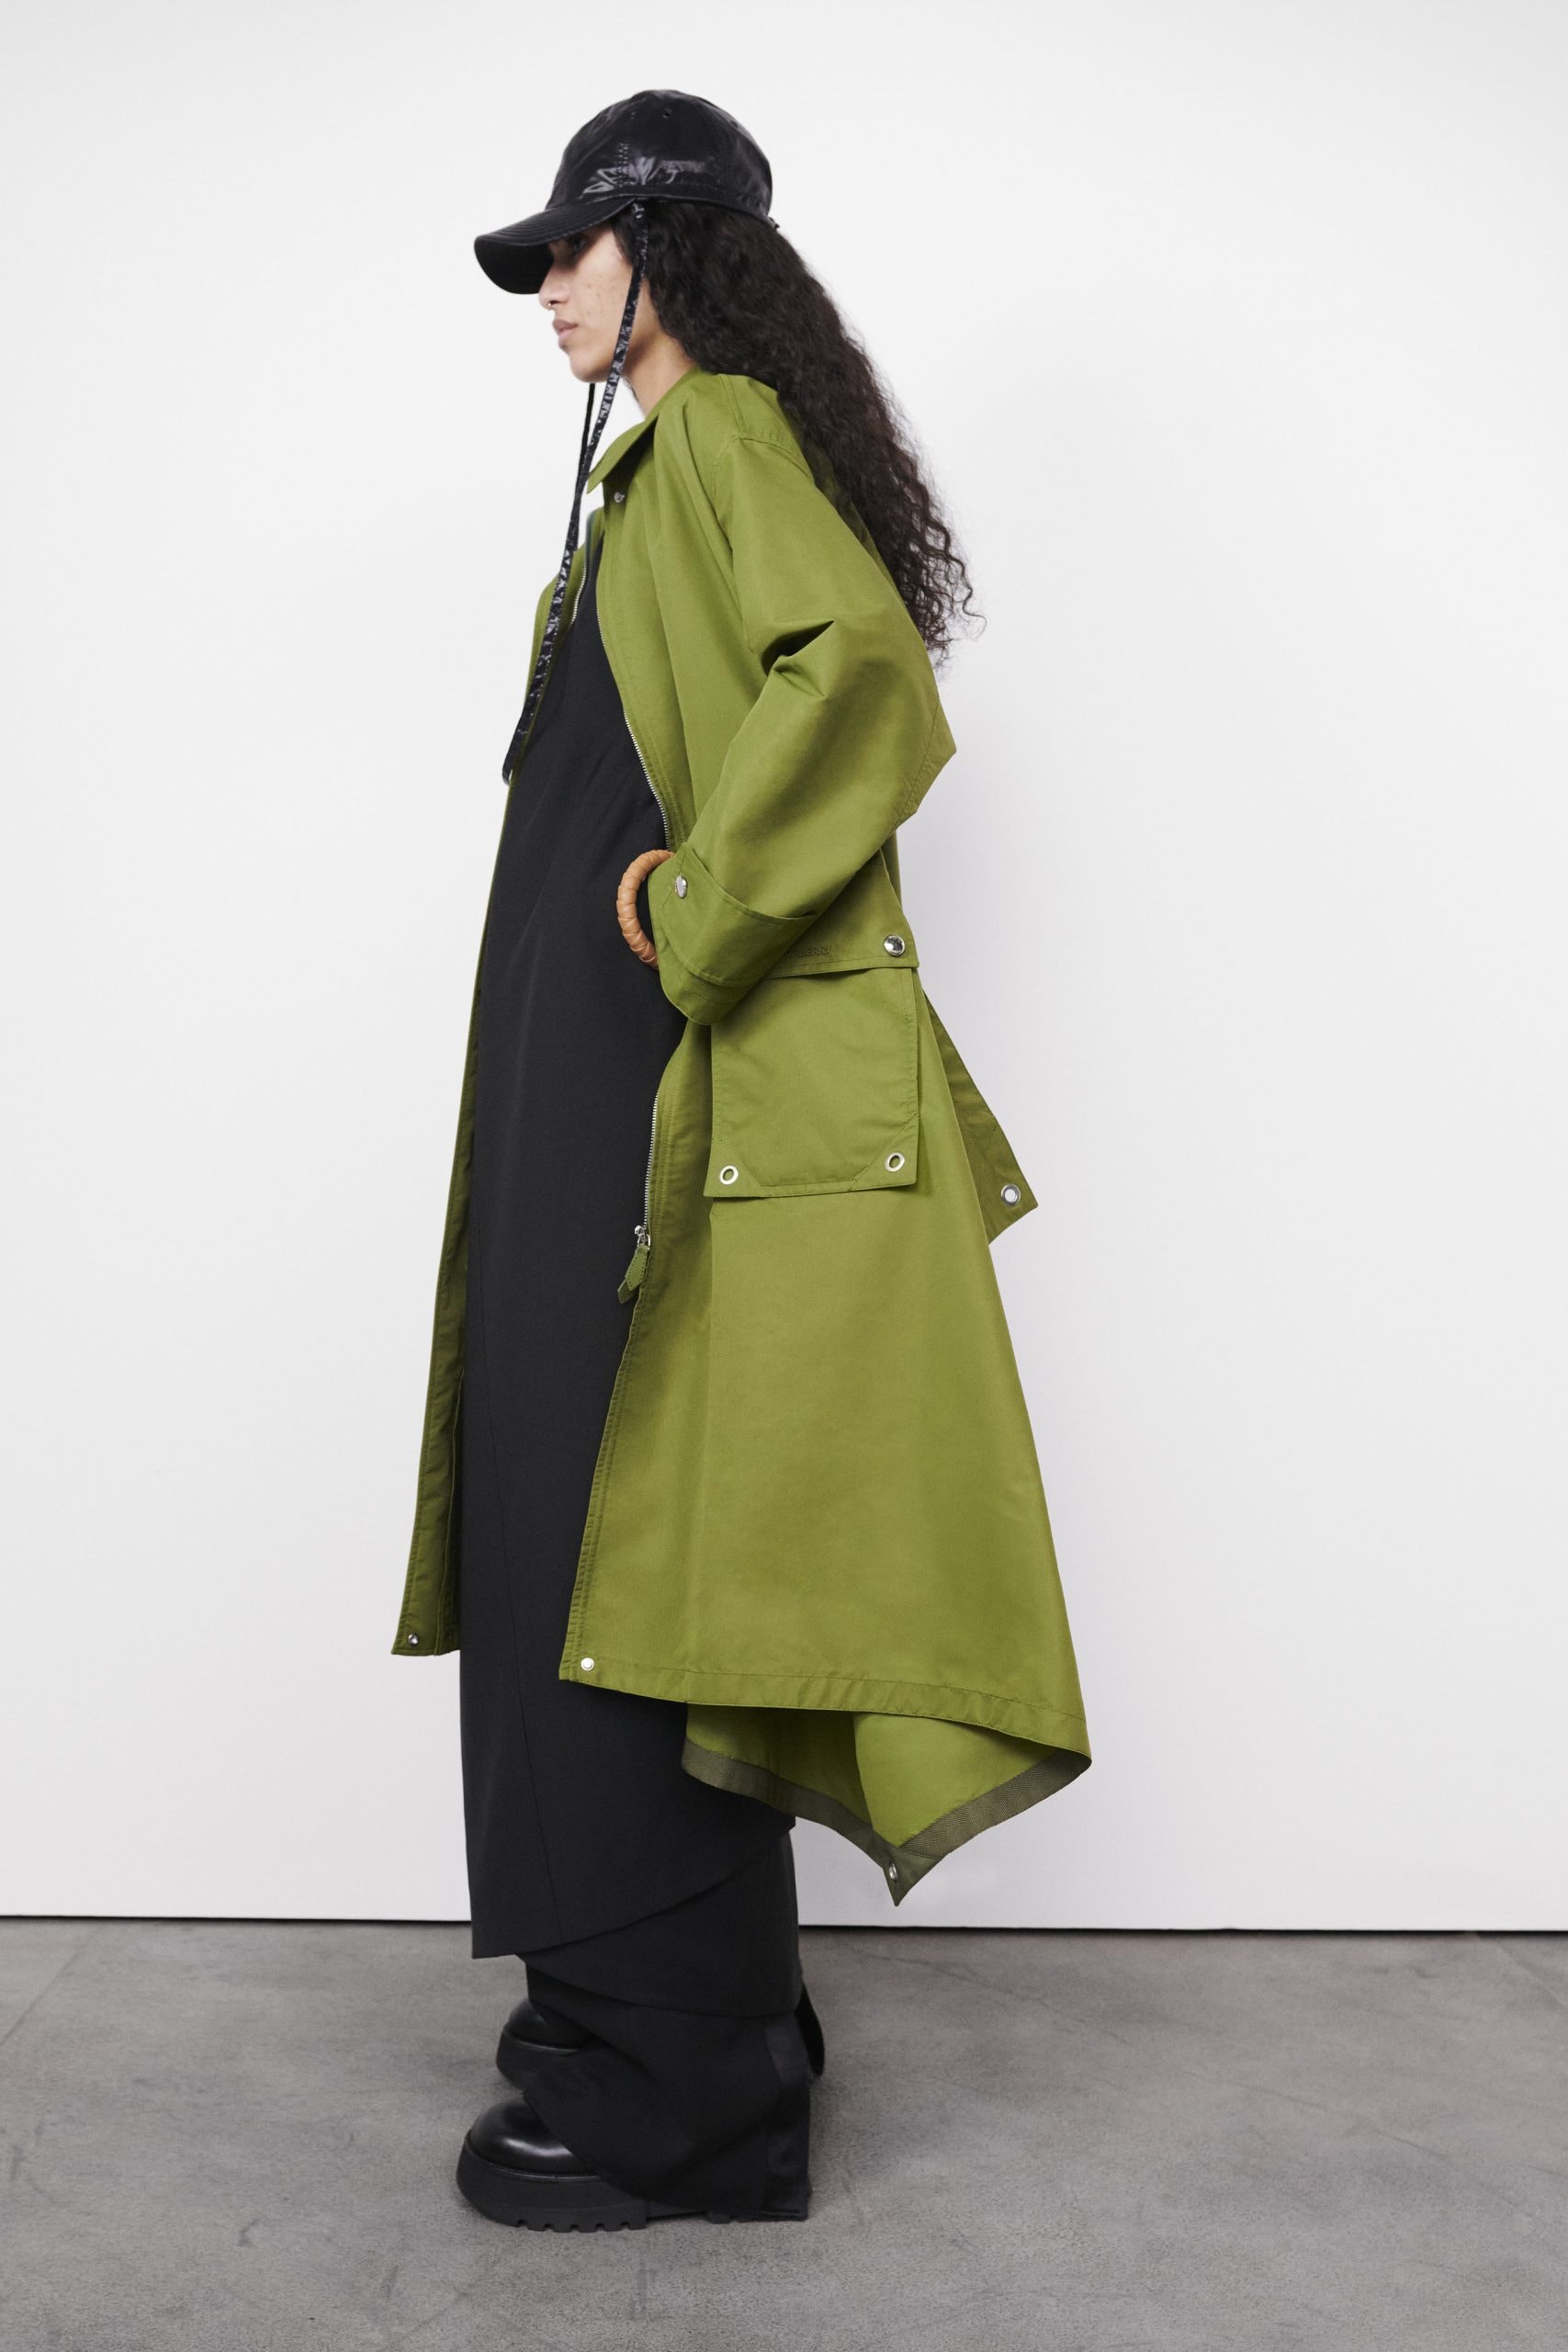 Burberry 2022 pre-fall collection